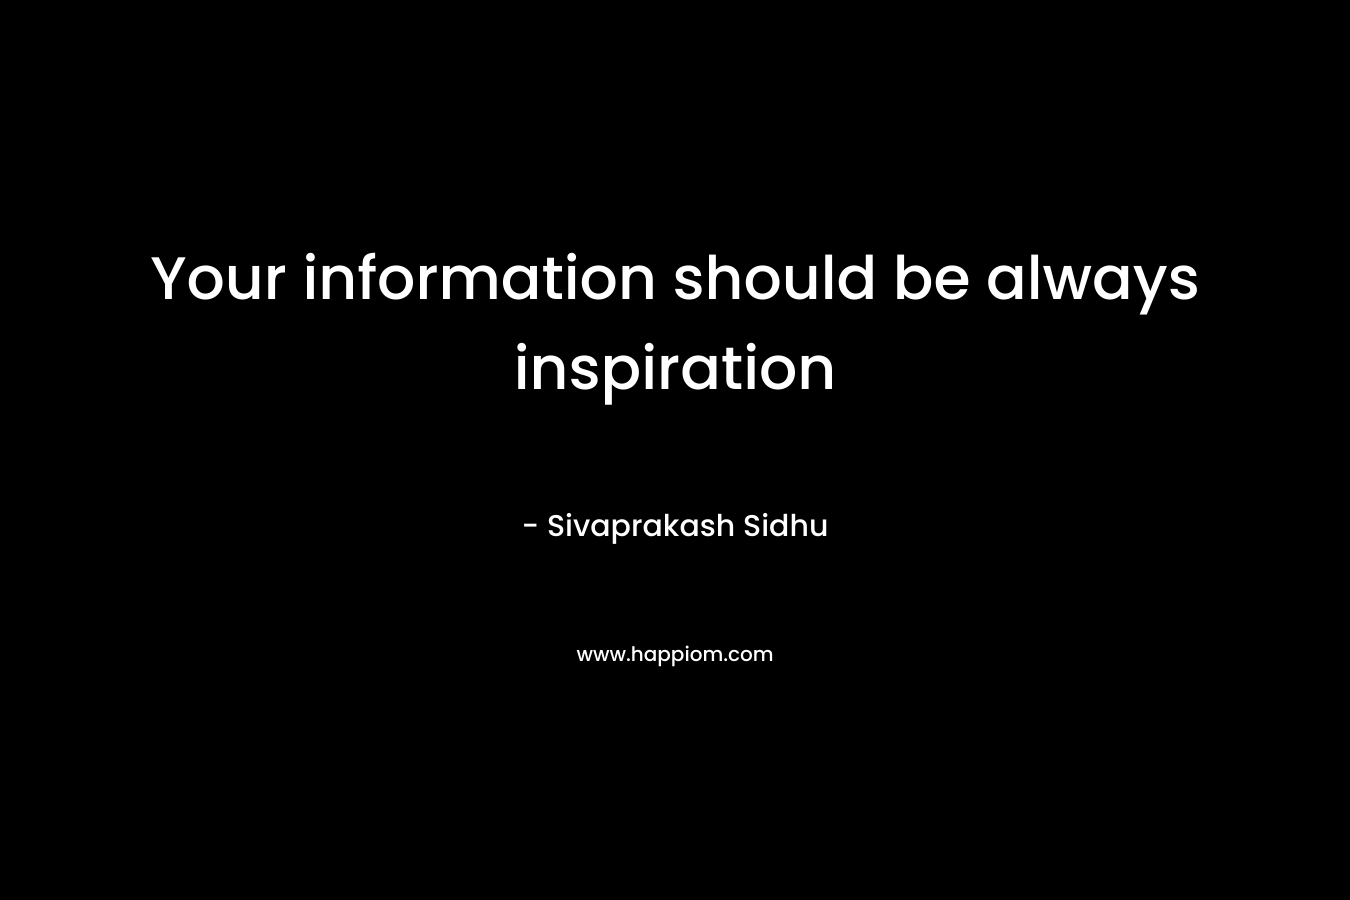 Your information should be always inspiration